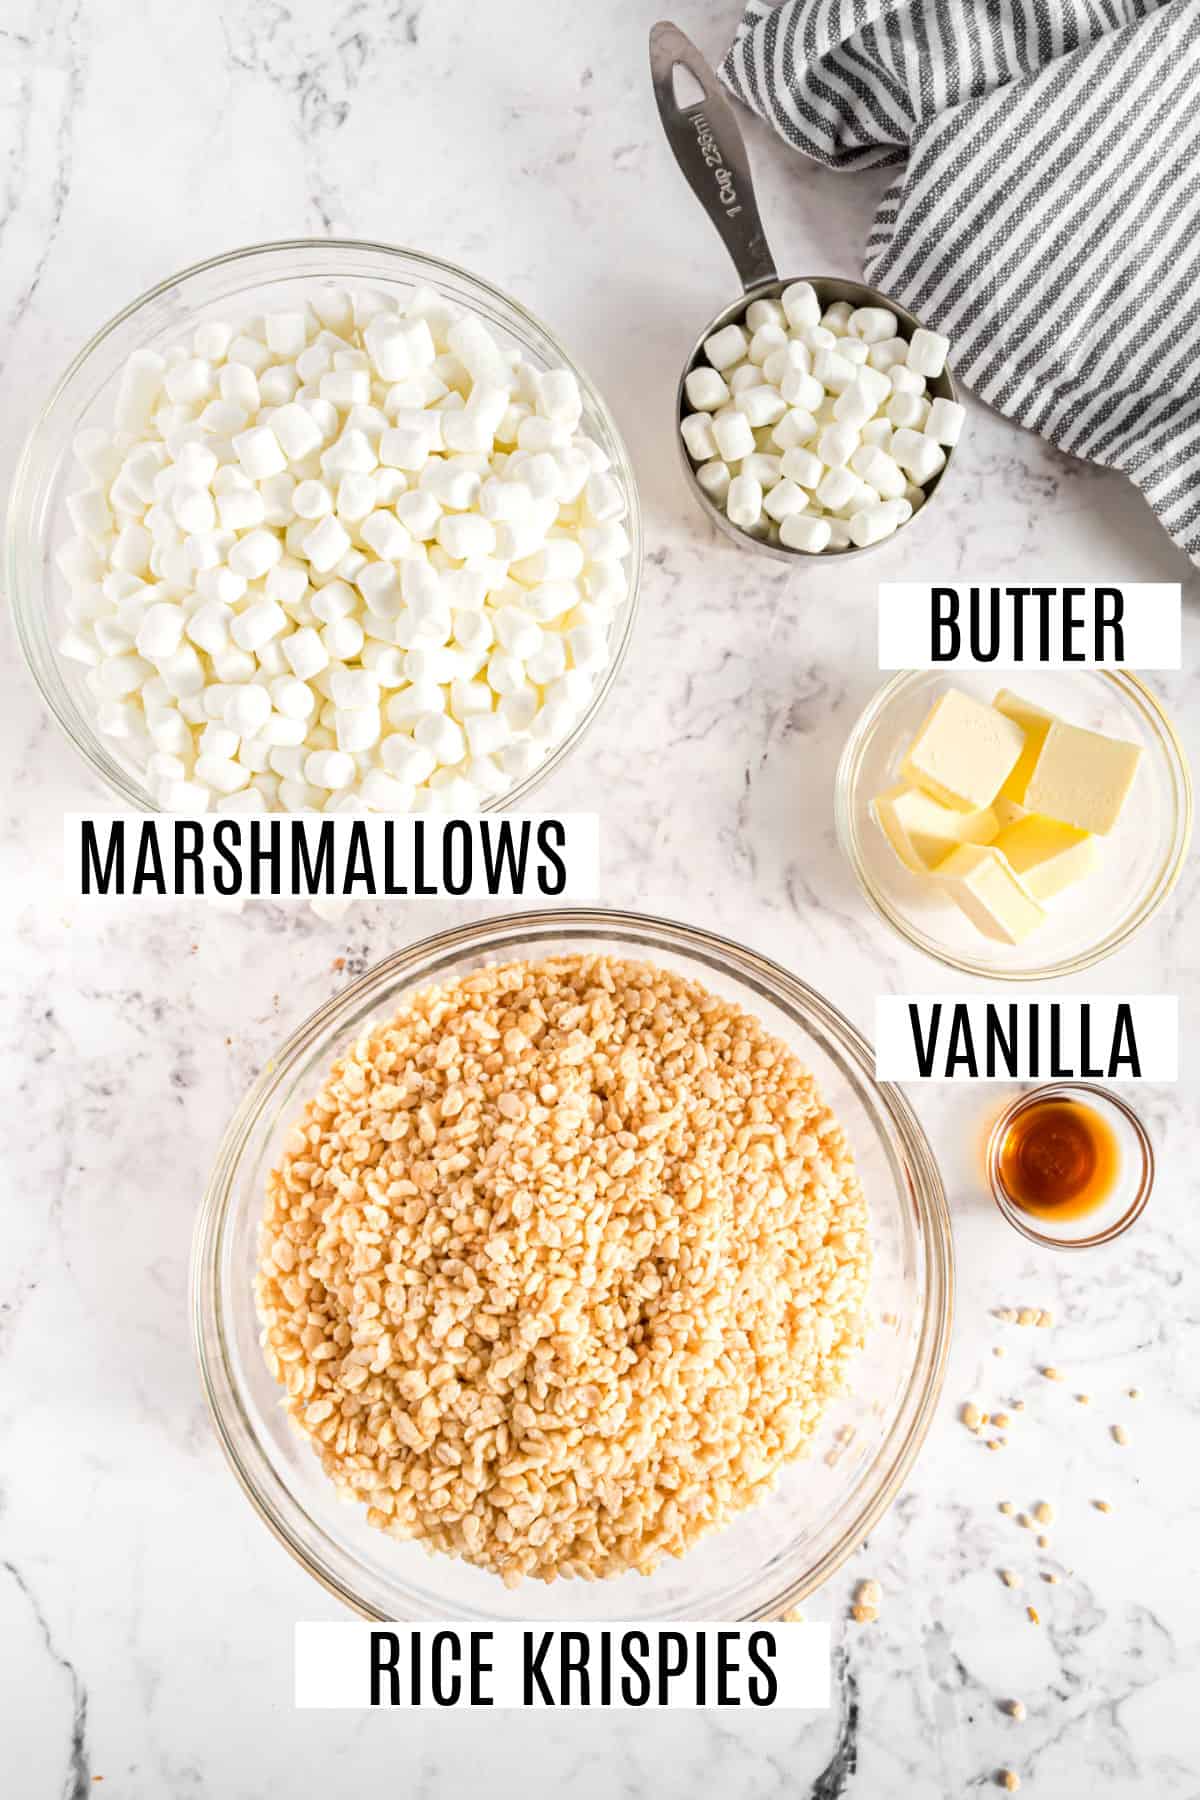 Only four ingredients needed for original rice krispie treats recipe.